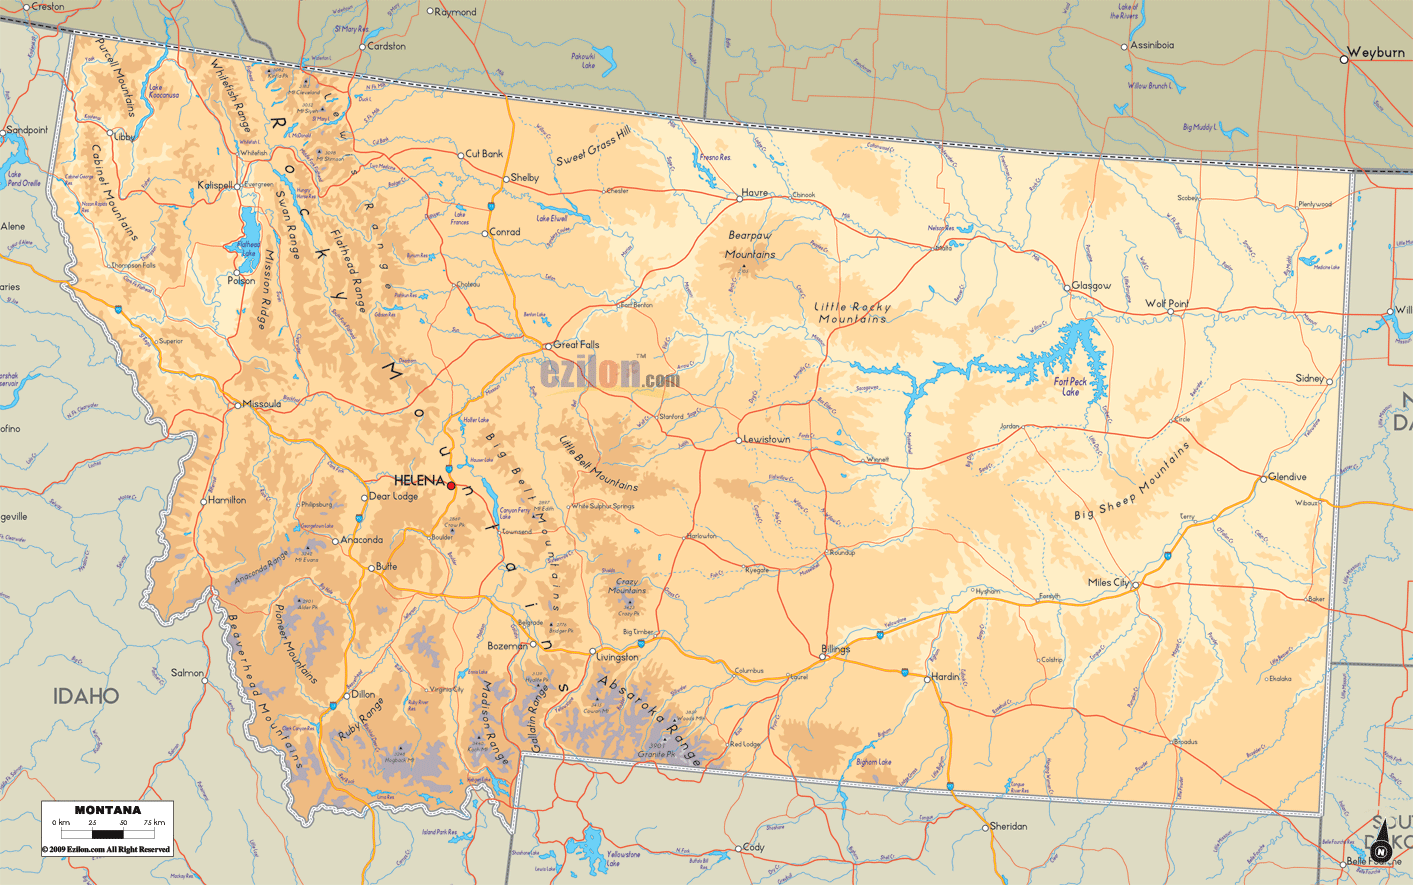 Physical map of Montana State, USA showing major geographical features such as rivers, lakes, topography and land formations.